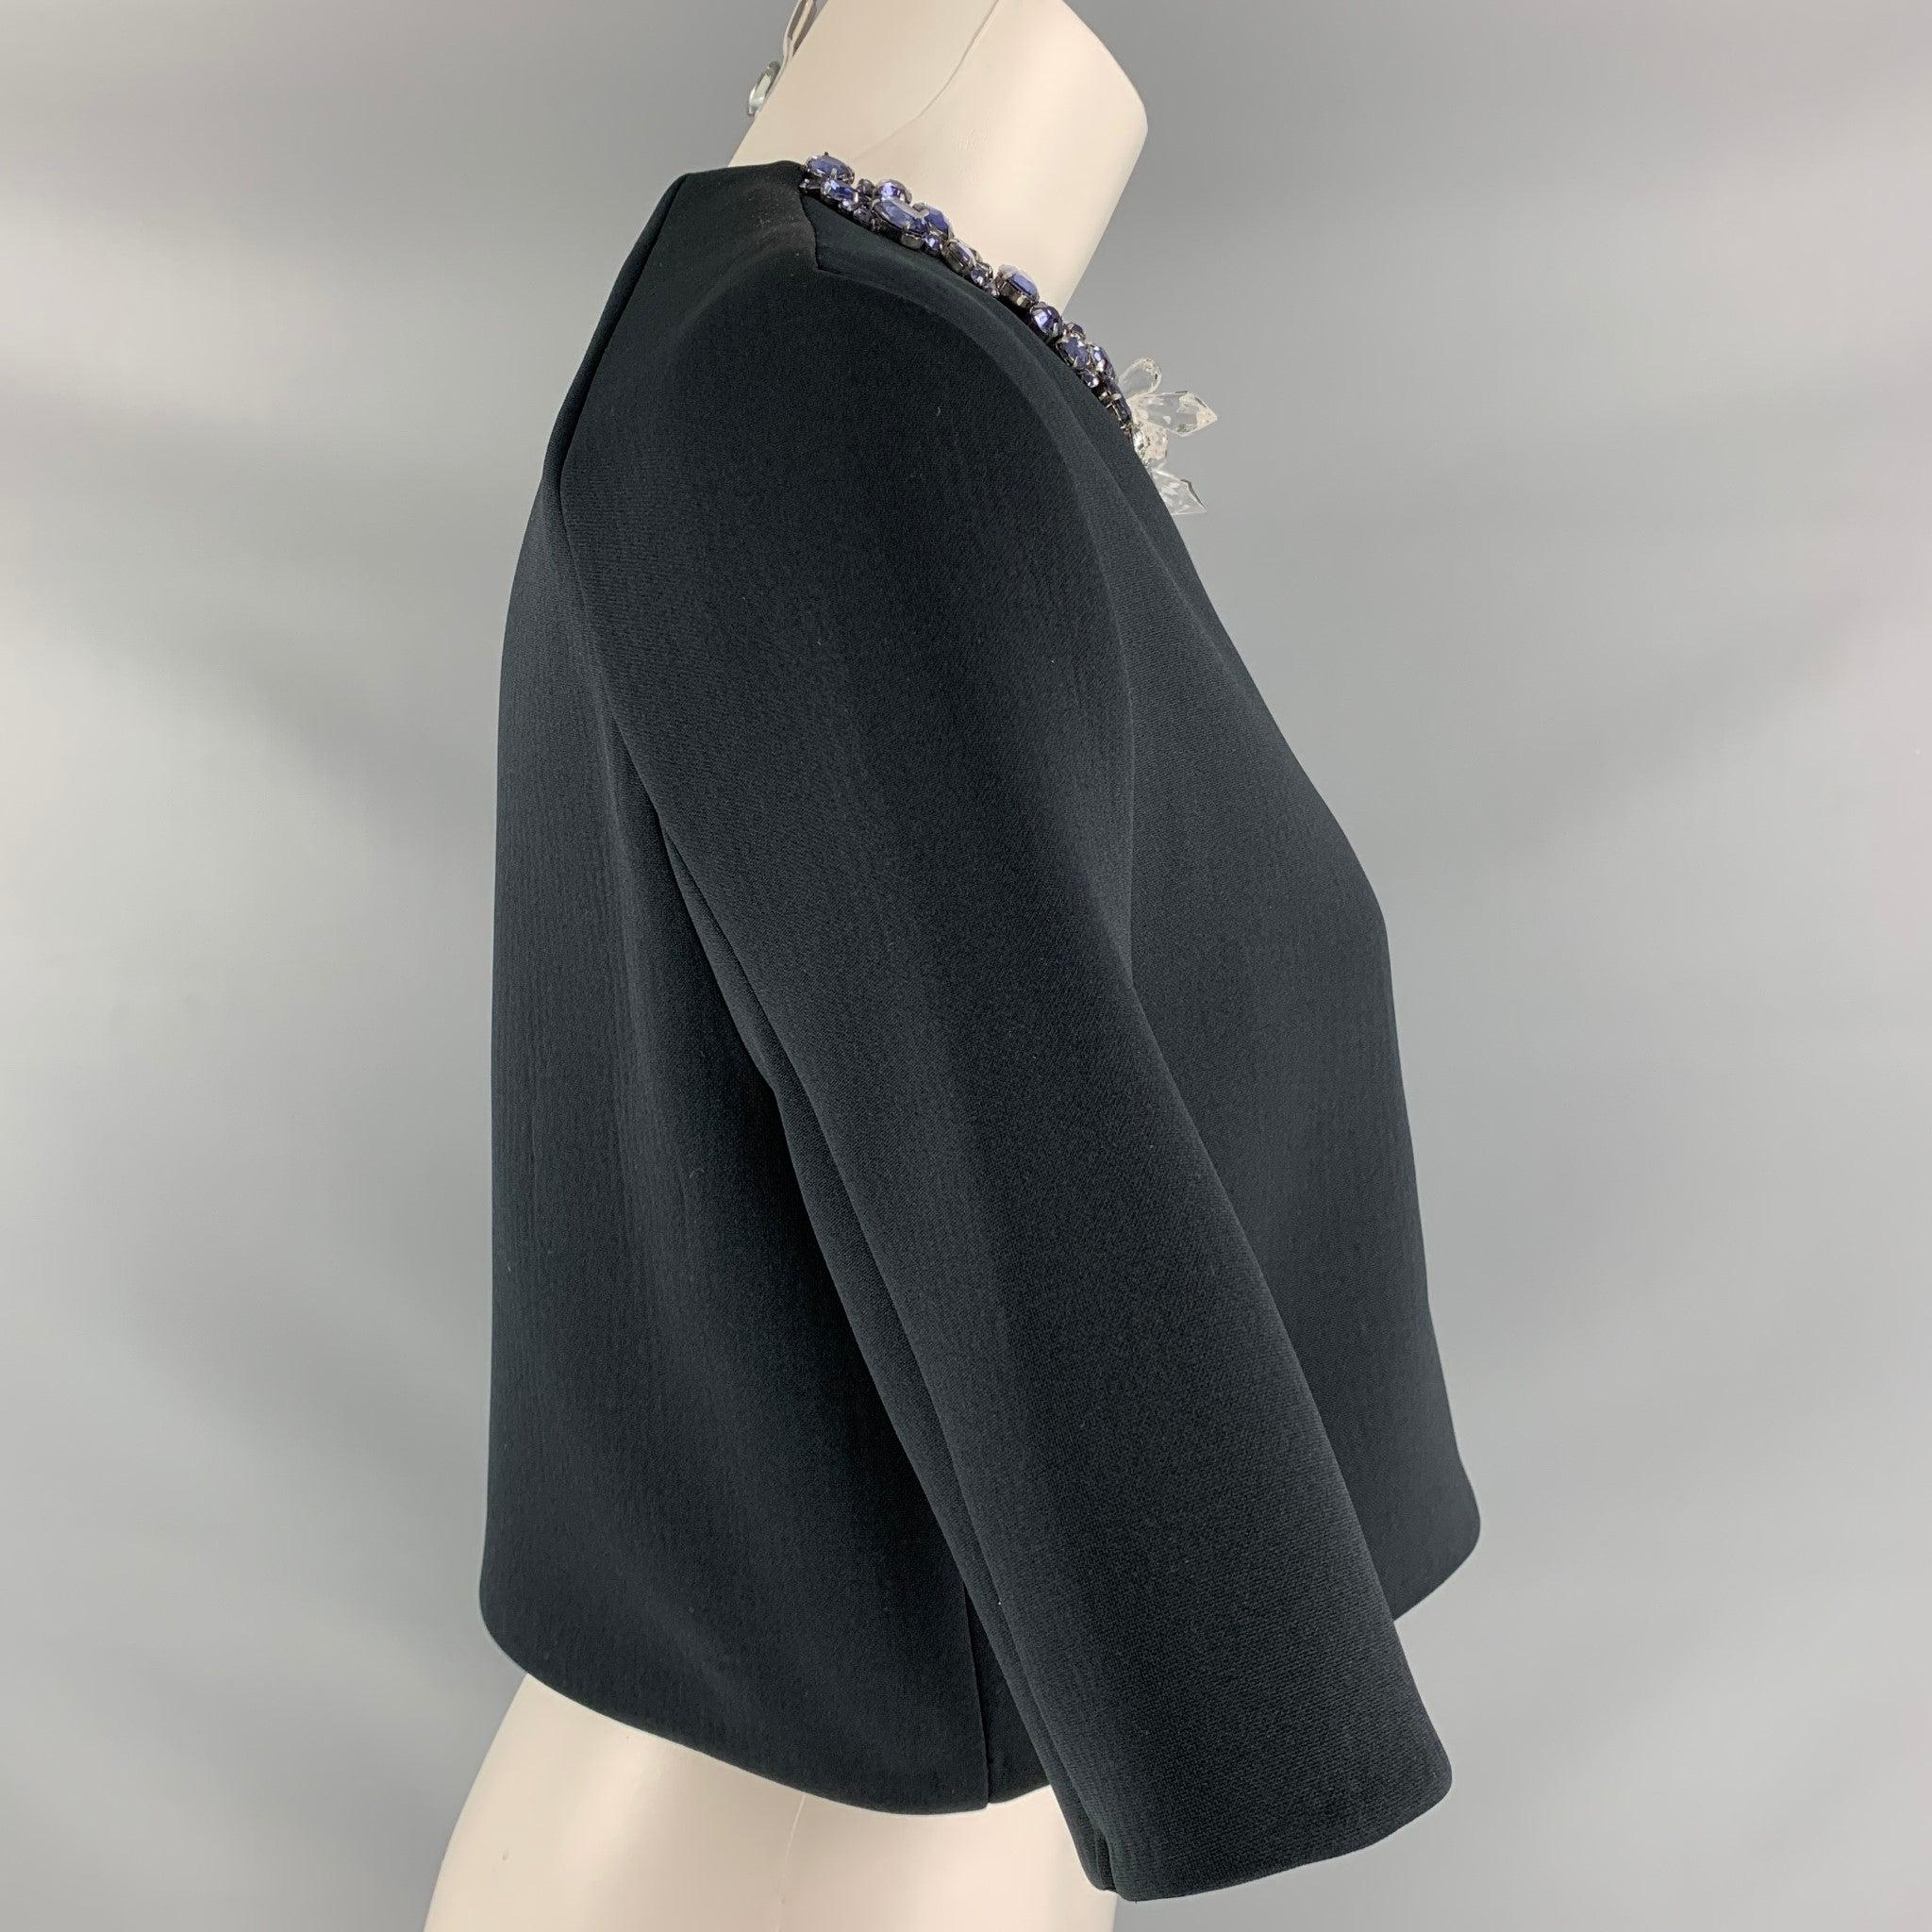 3.1 PHILLIP LIM Size 0 Black Polyester Rhinestones Dress Top In Excellent Condition For Sale In San Francisco, CA